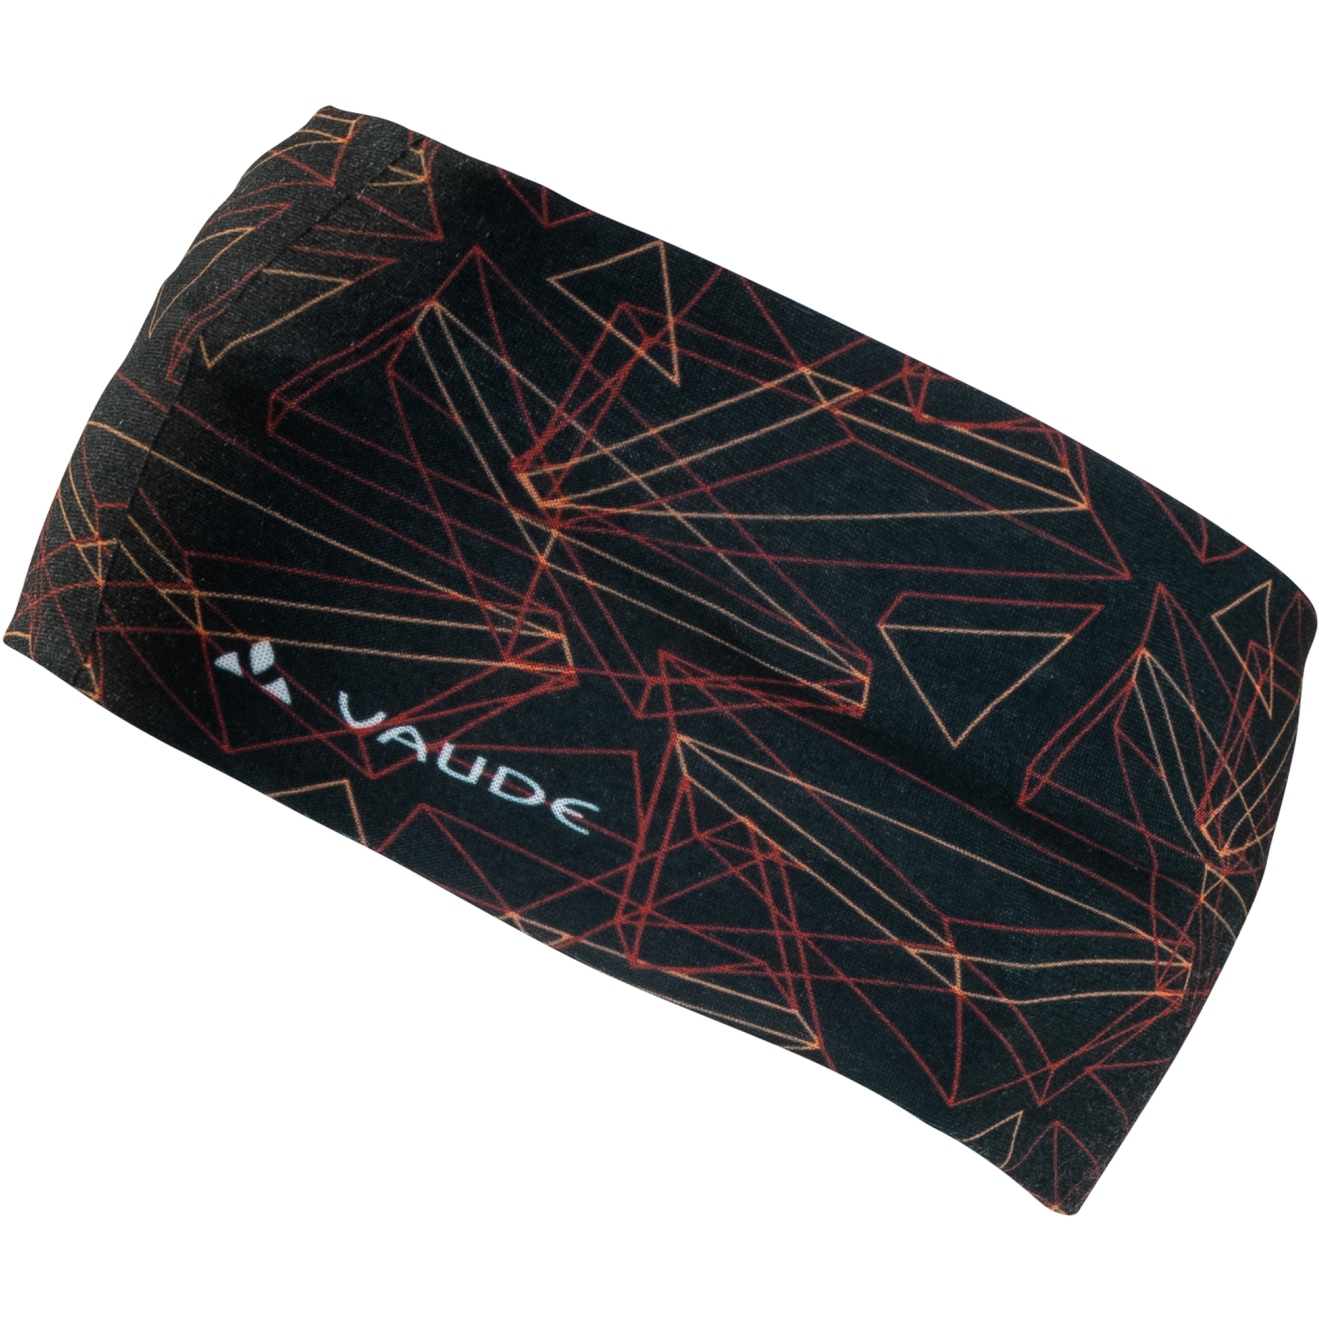 Picture of Vaude Cassons Headband - black/red